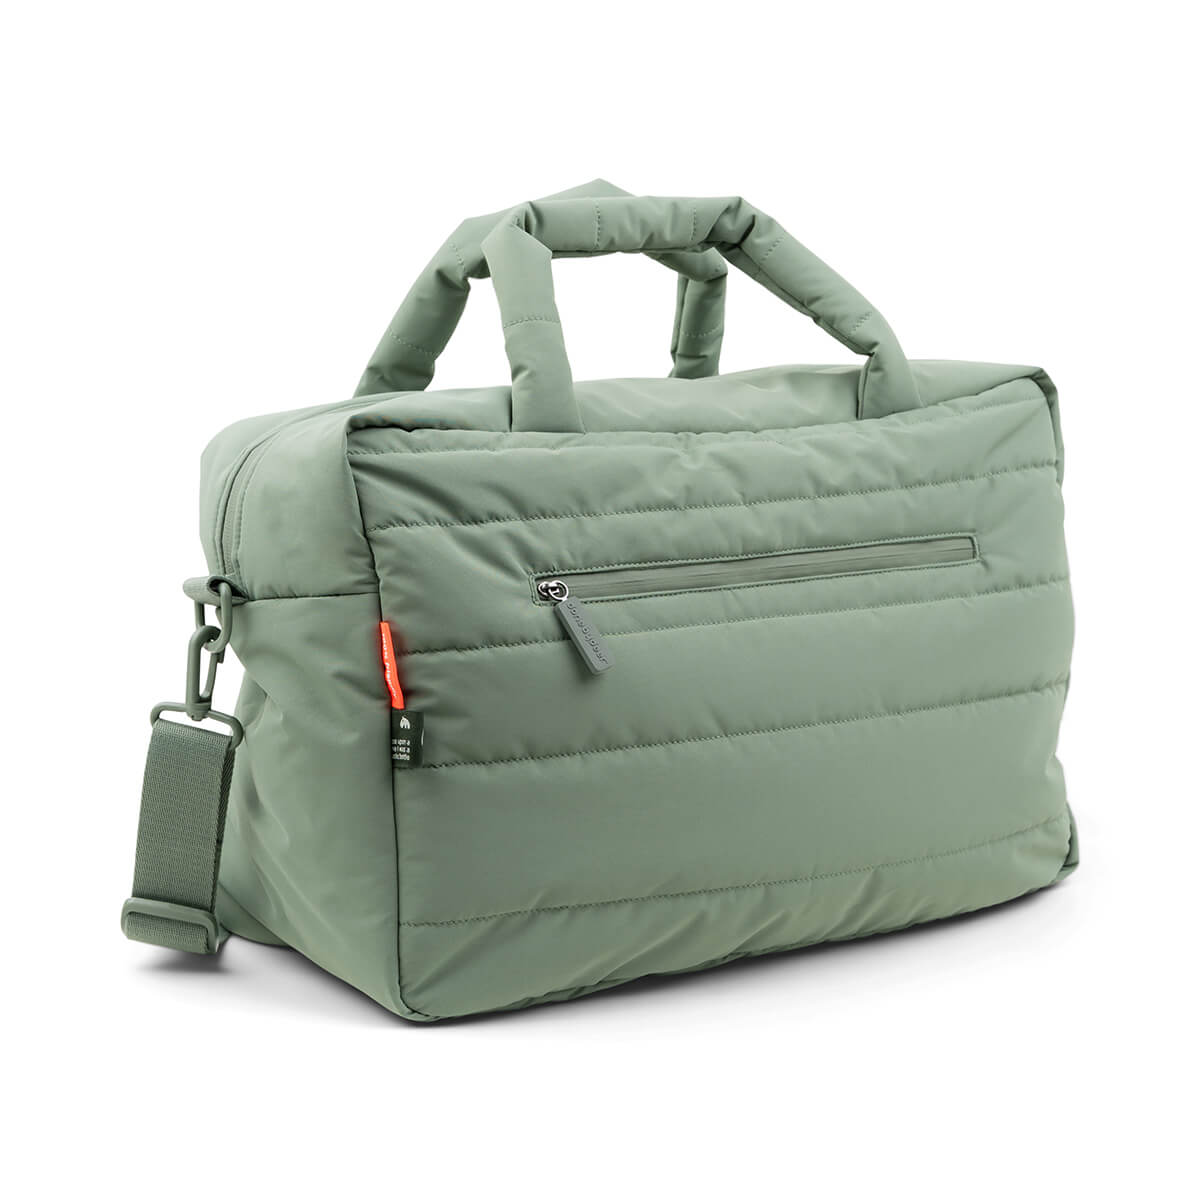 Quilted changing bag - Green